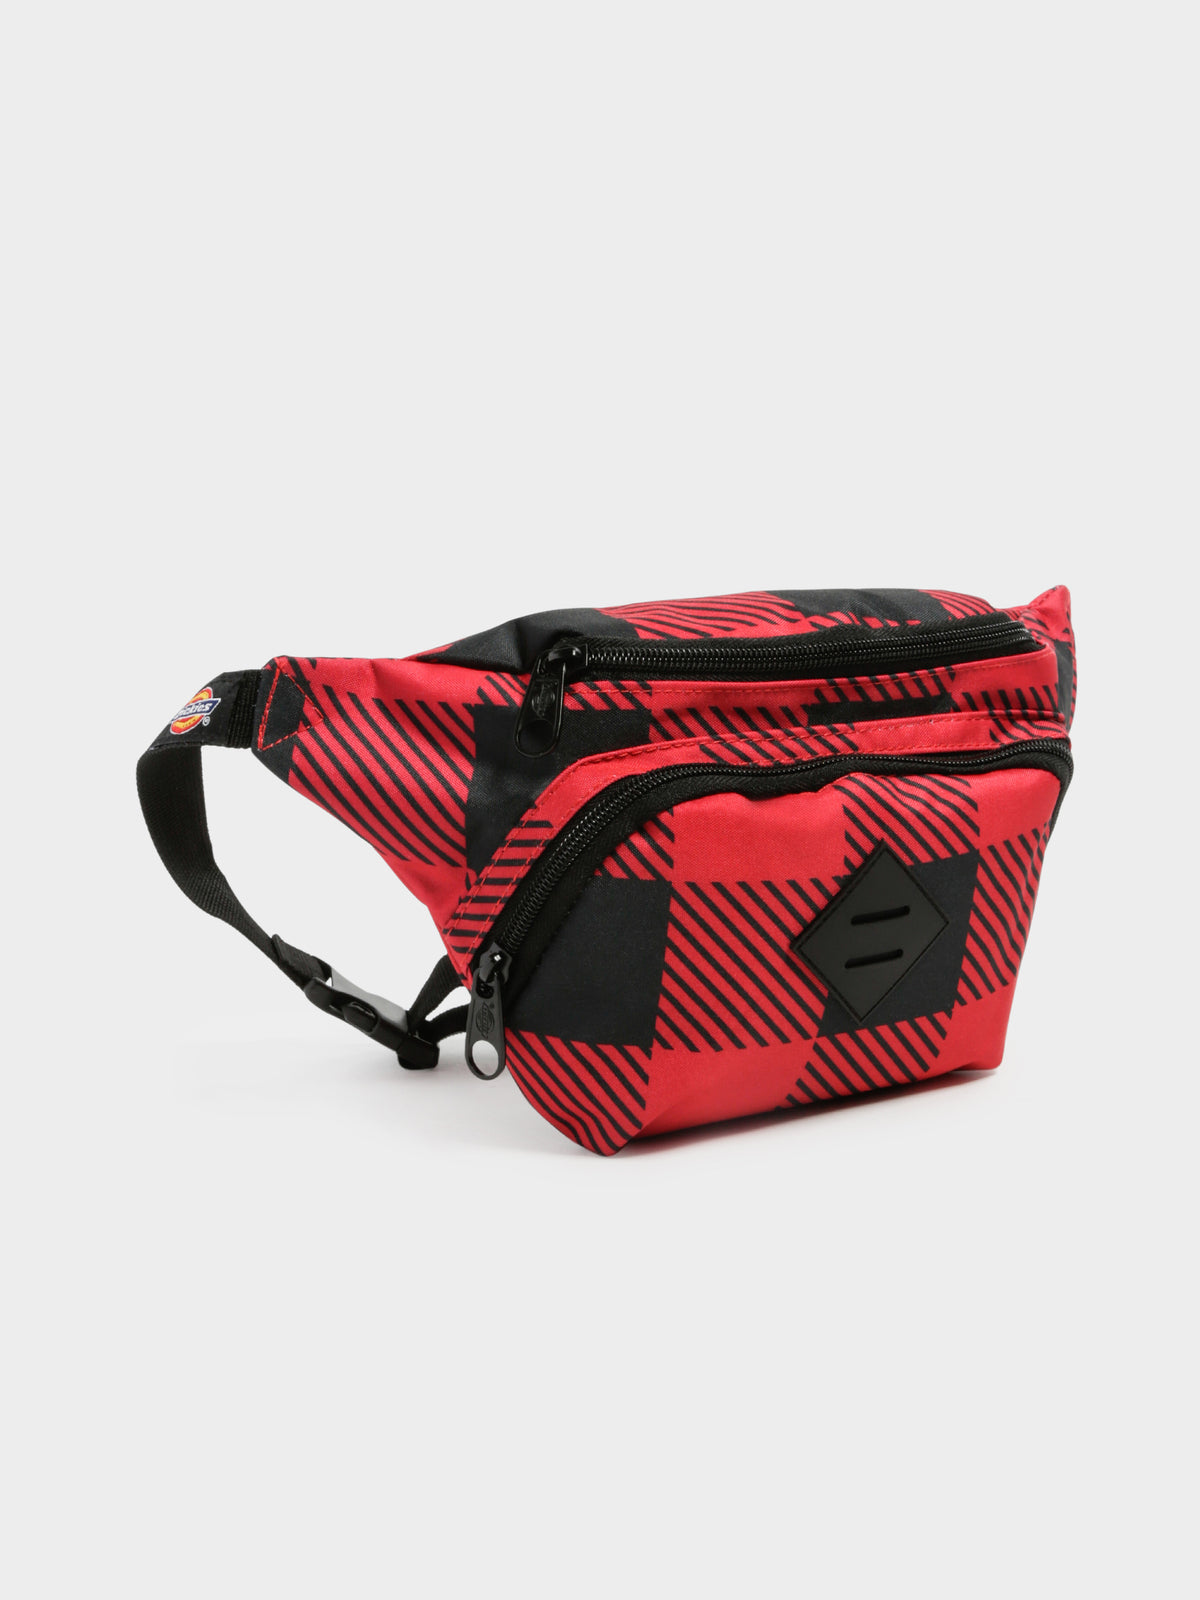 Hip Sack in Red Buffalo Check